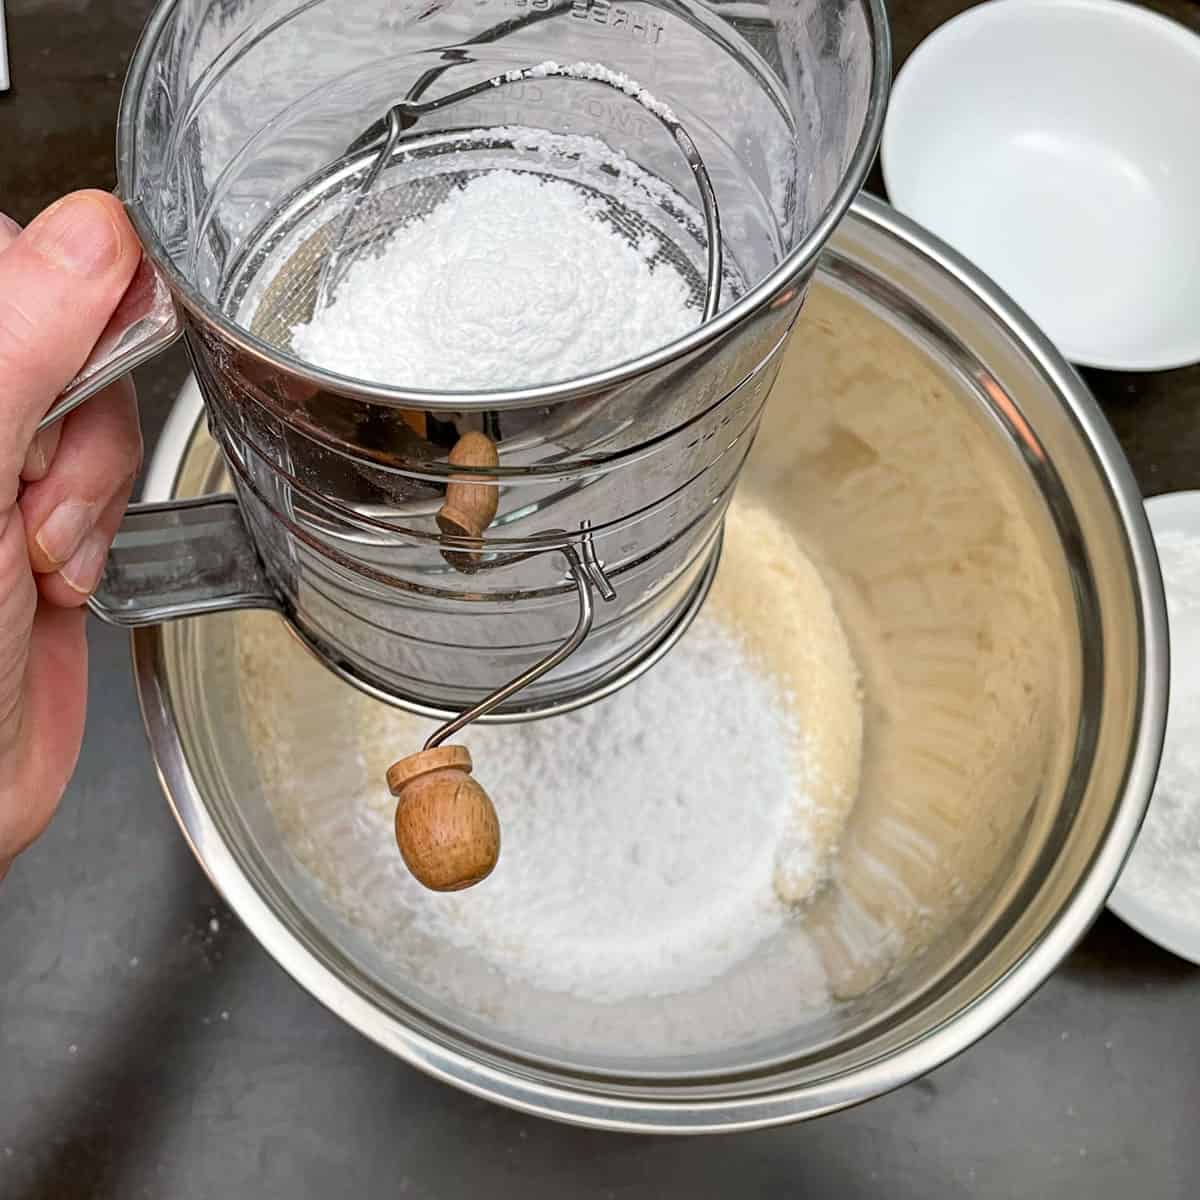 Sifting powdered sugar into a bowl that has almond flour in it.